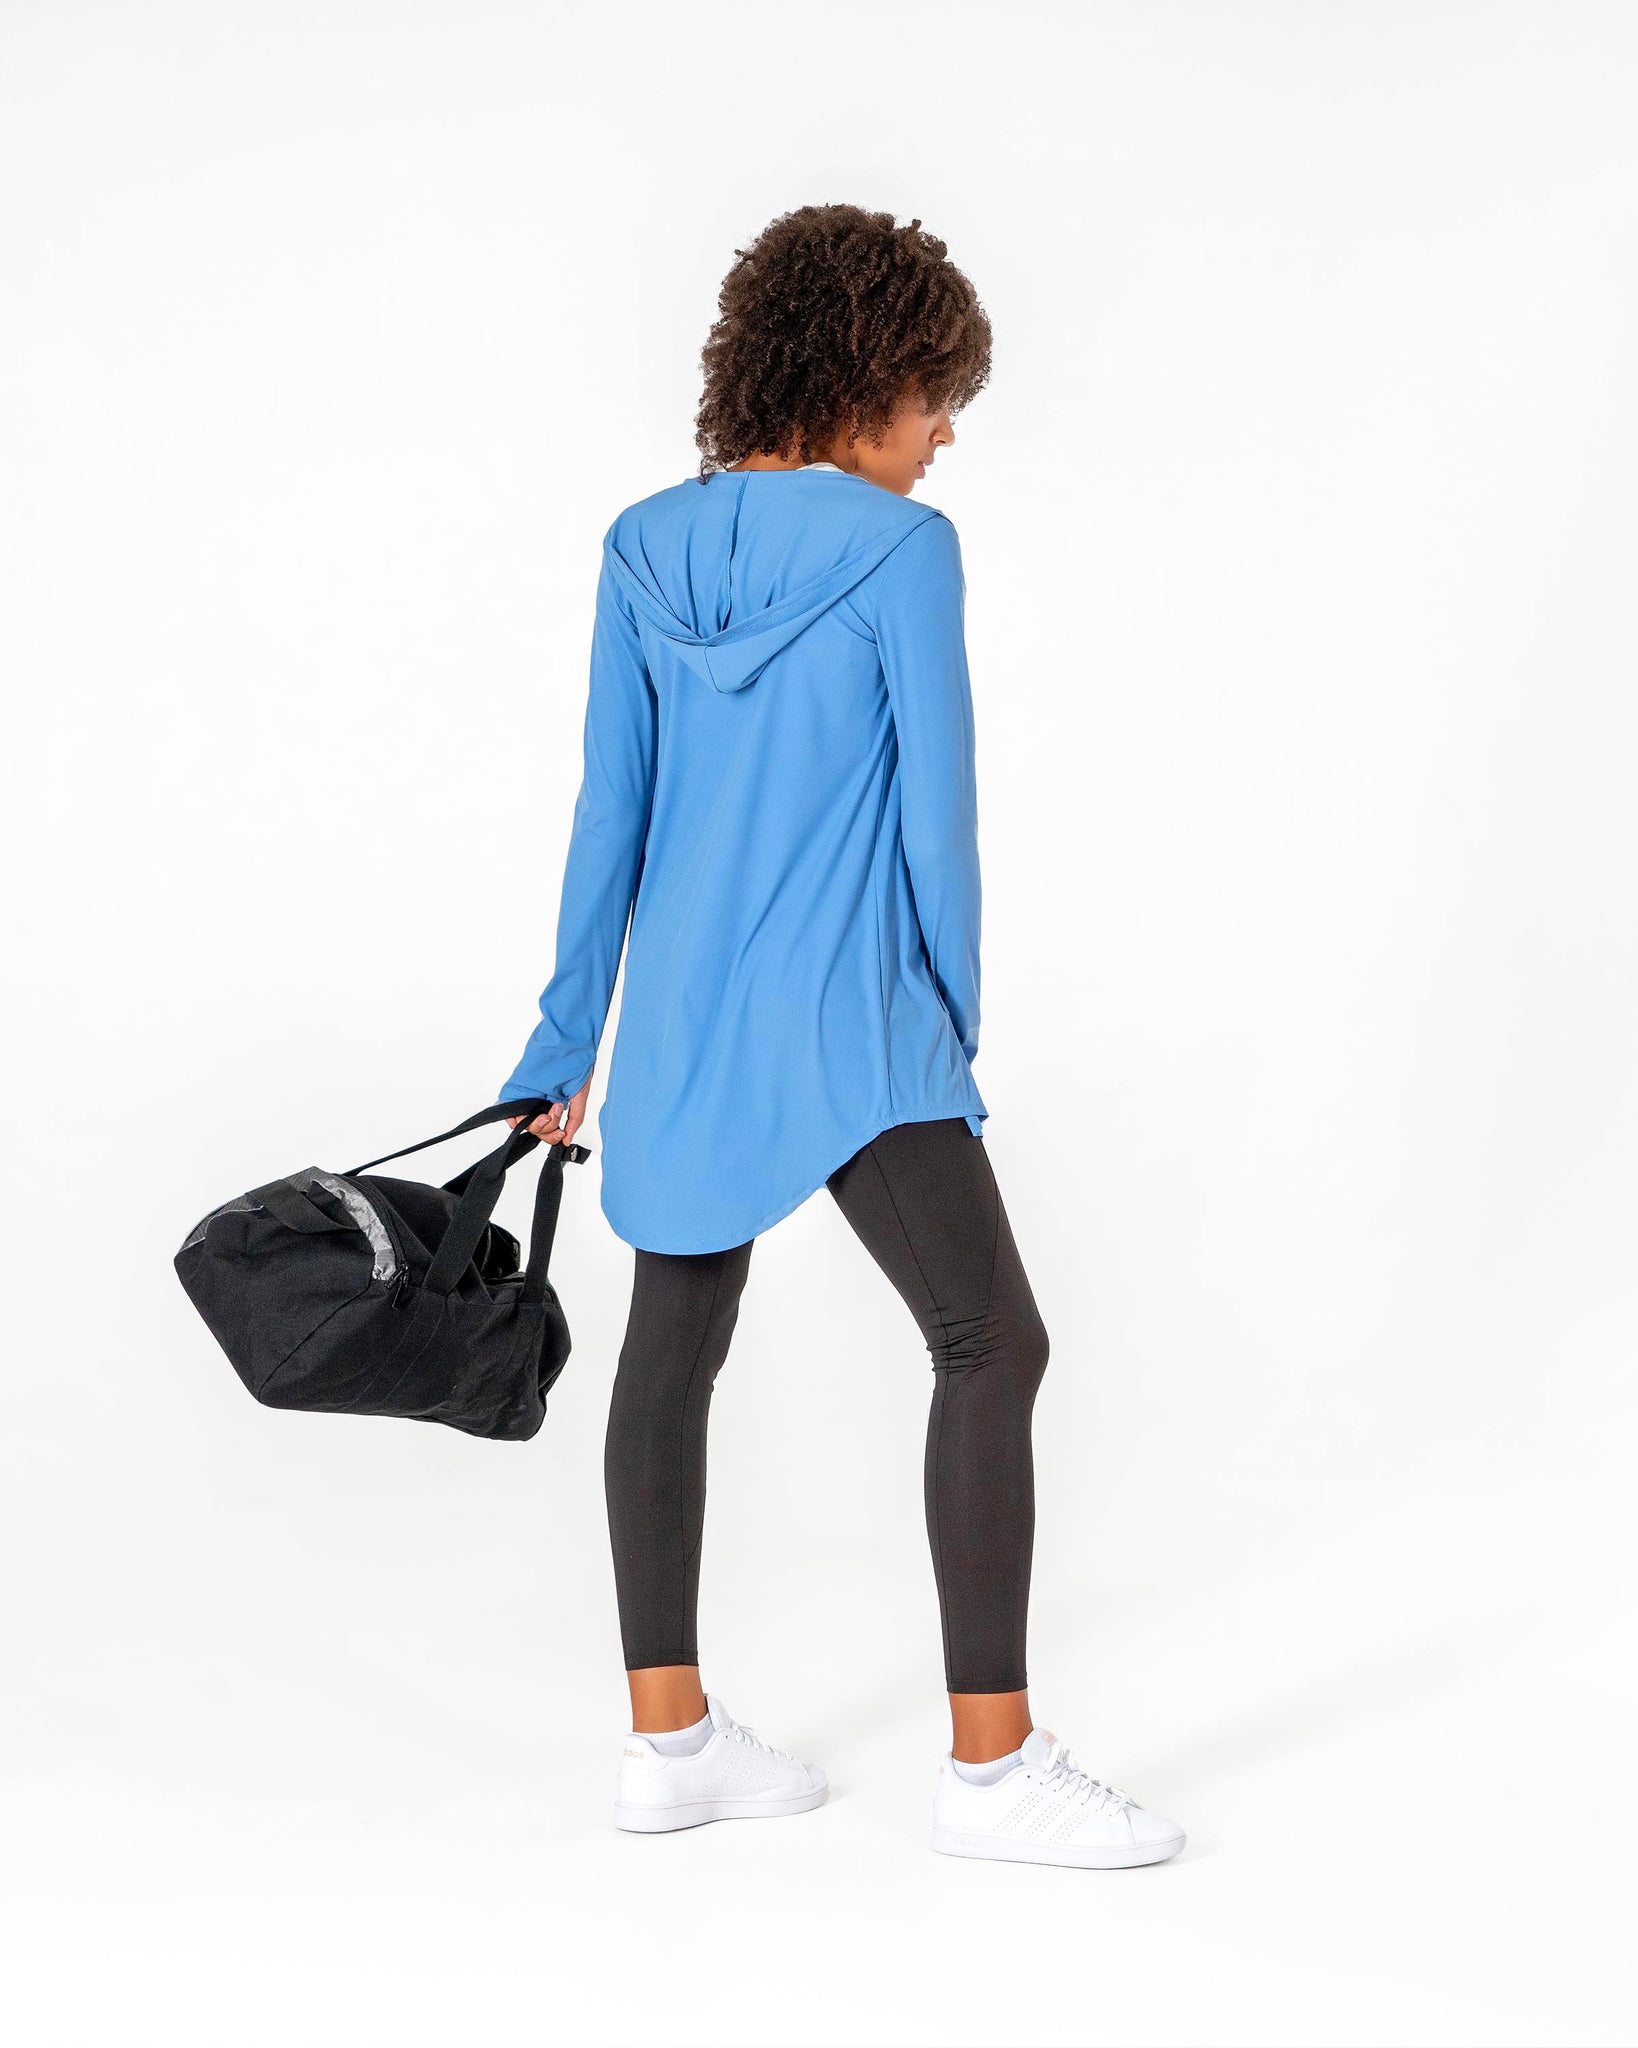 Move It Cardigan in light blue by Veil Garments. Modest activewear collection.